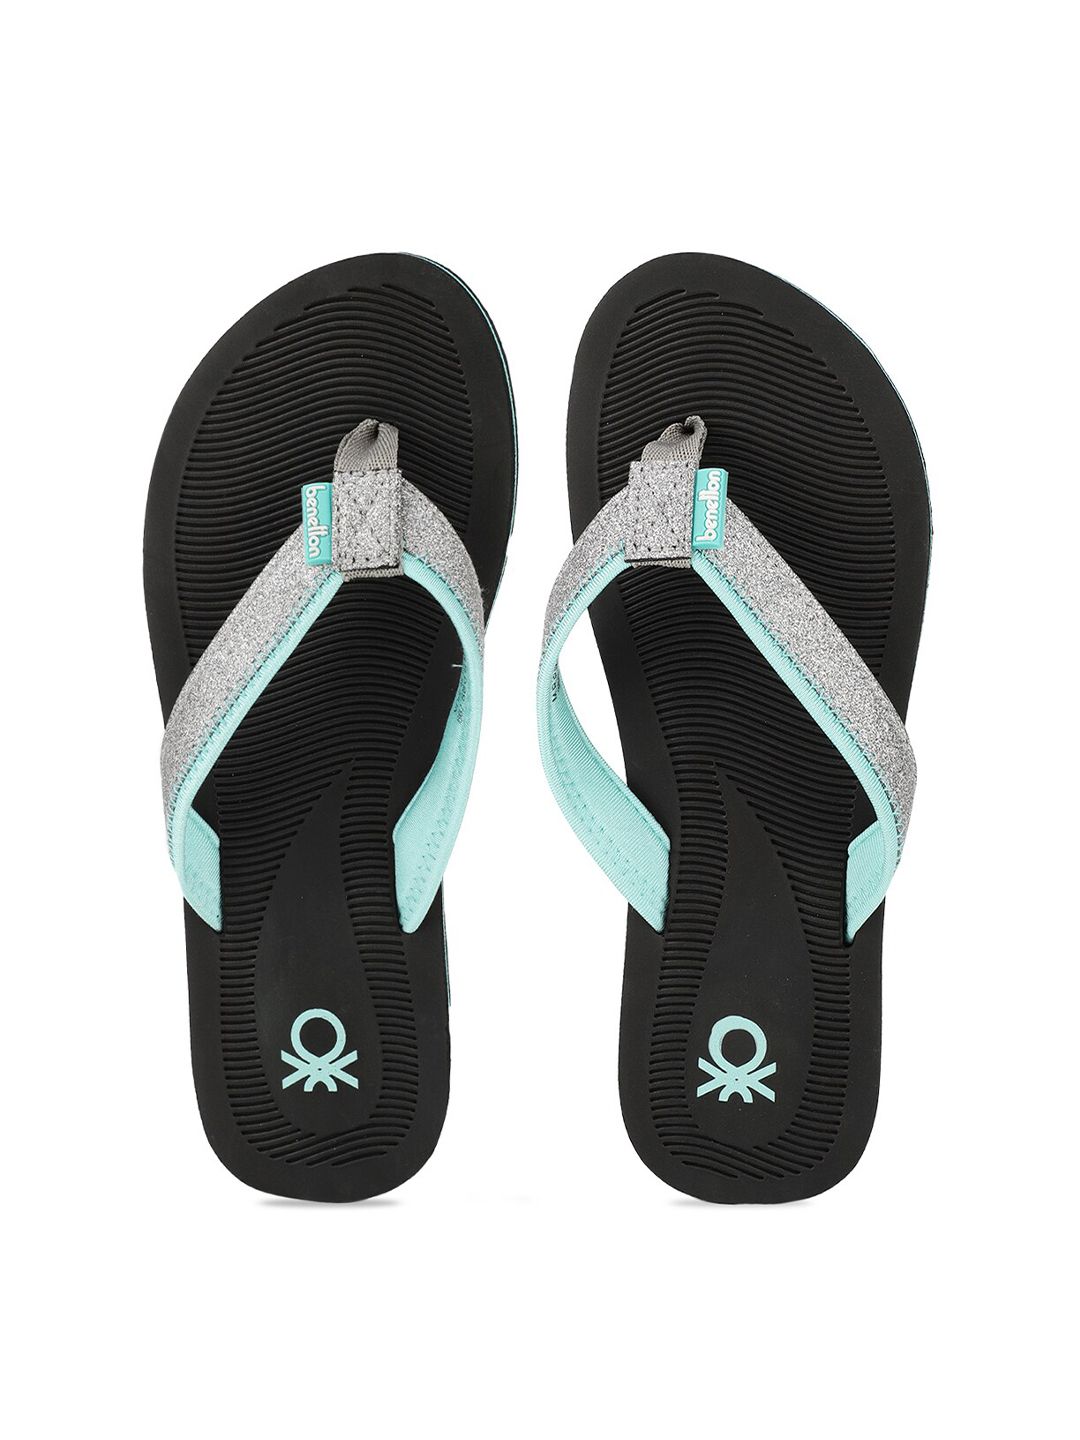 United Colors of Benetton Women Black & Silver-Toned Solid Thong Flip-Flops Price in India